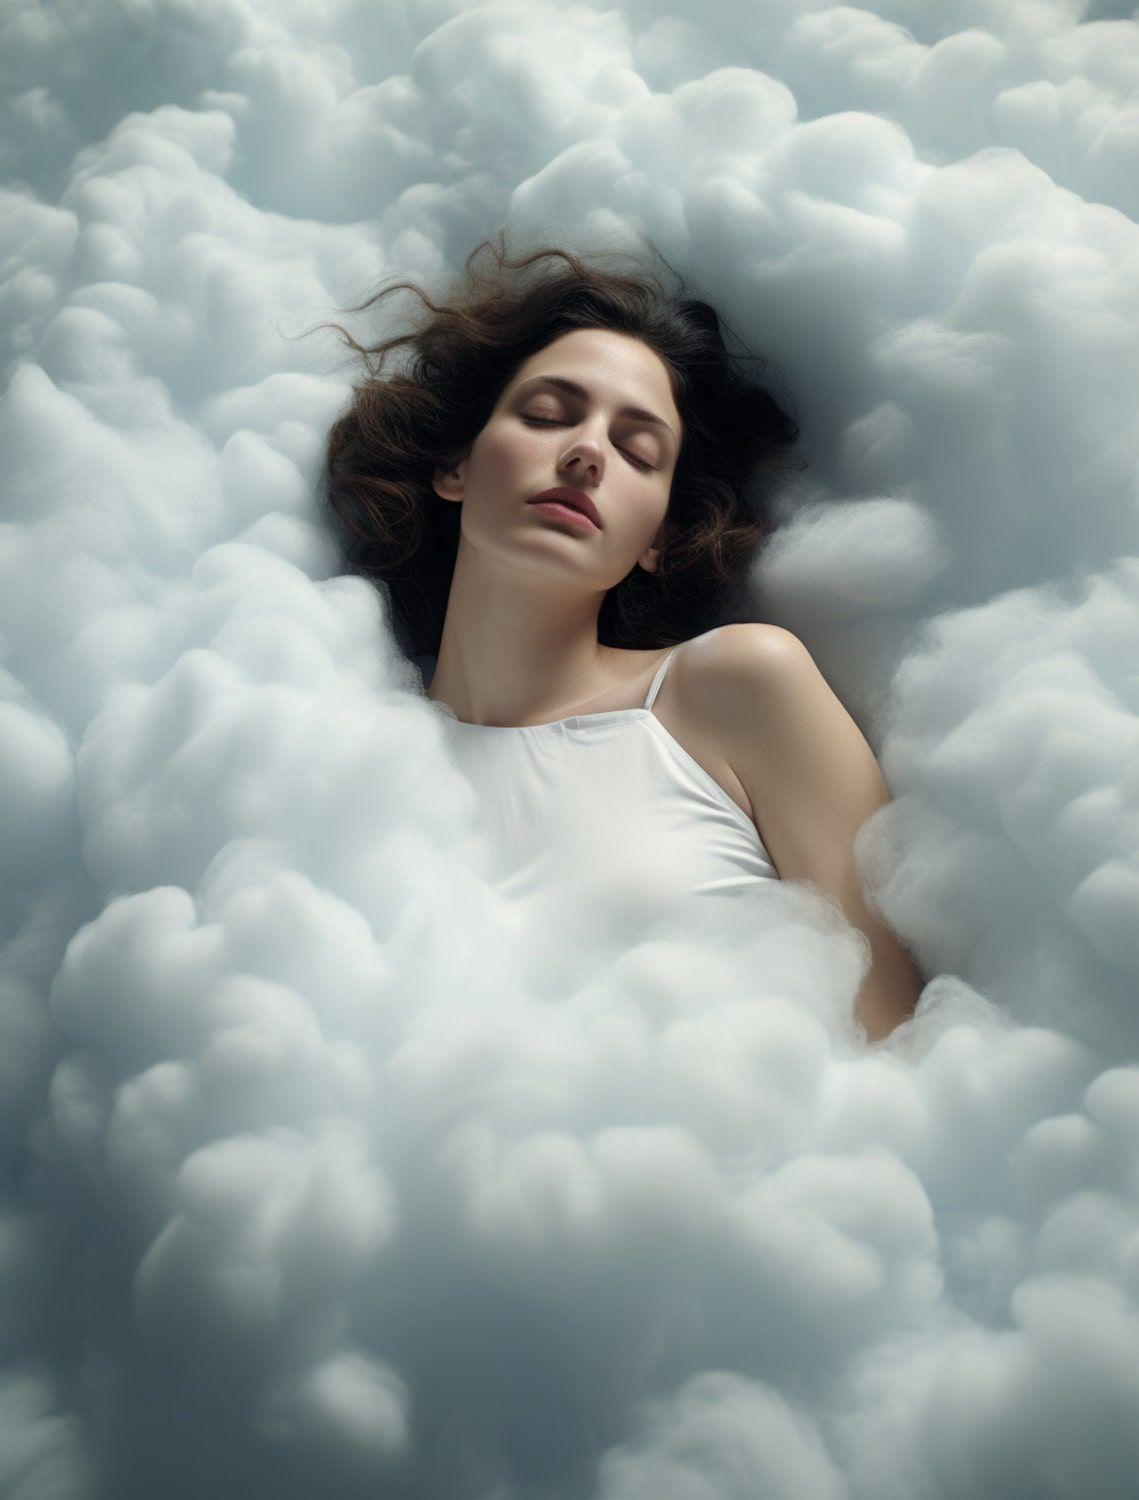 Sleep etiquette: The Art of Crafting Healthy Sleep Habits for a Refreshed Tomorrow